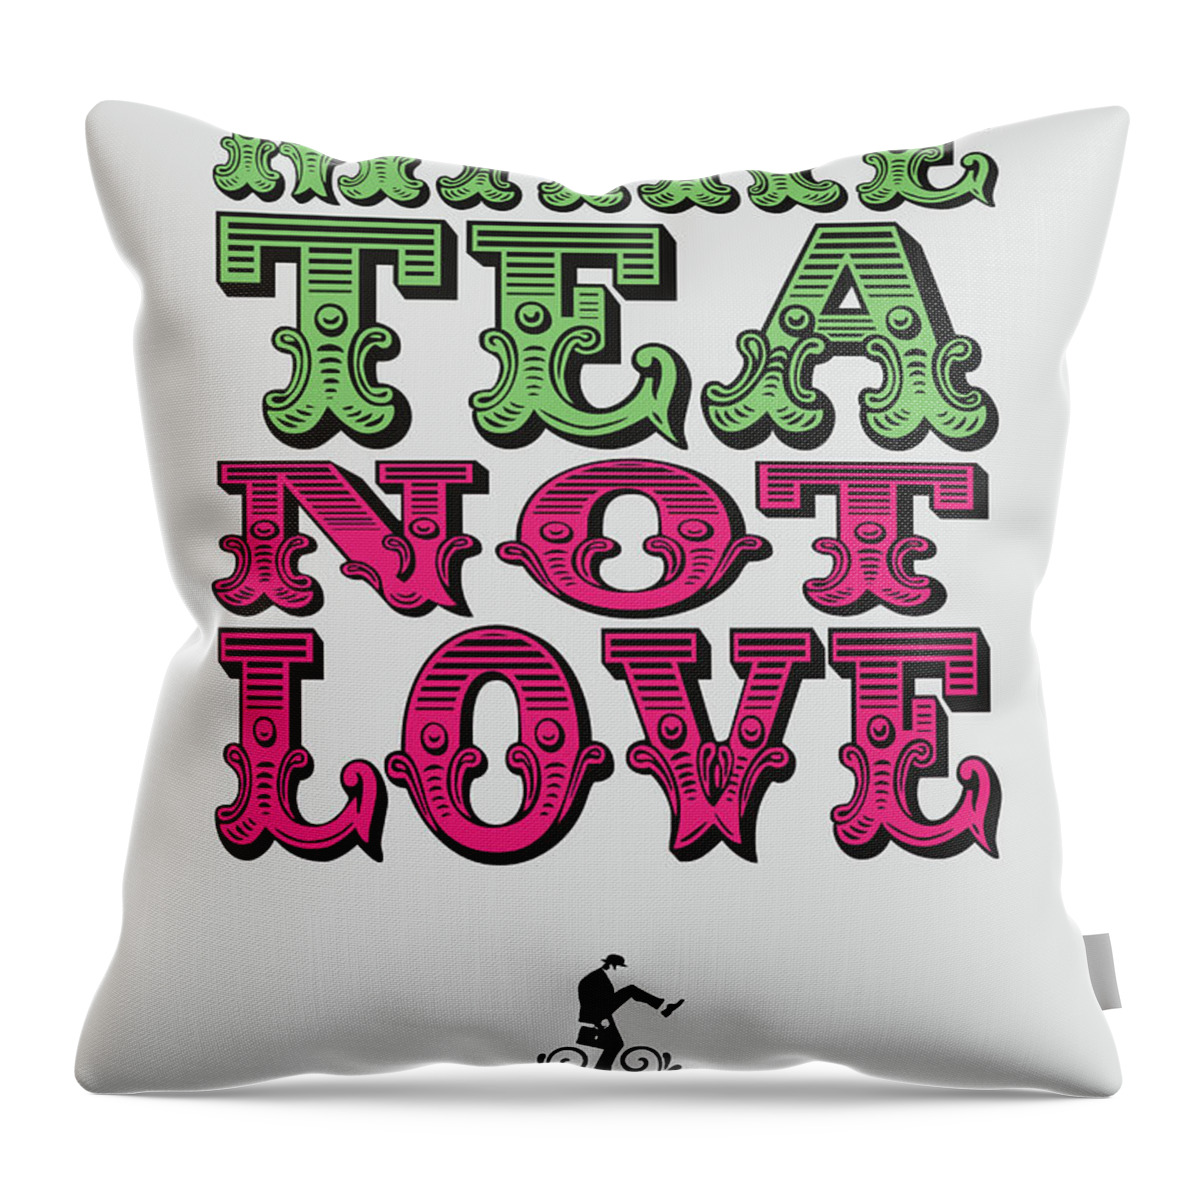 Parrot Throw Pillow featuring the digital art No16 My Silly Quote Poster by Chungkong Art